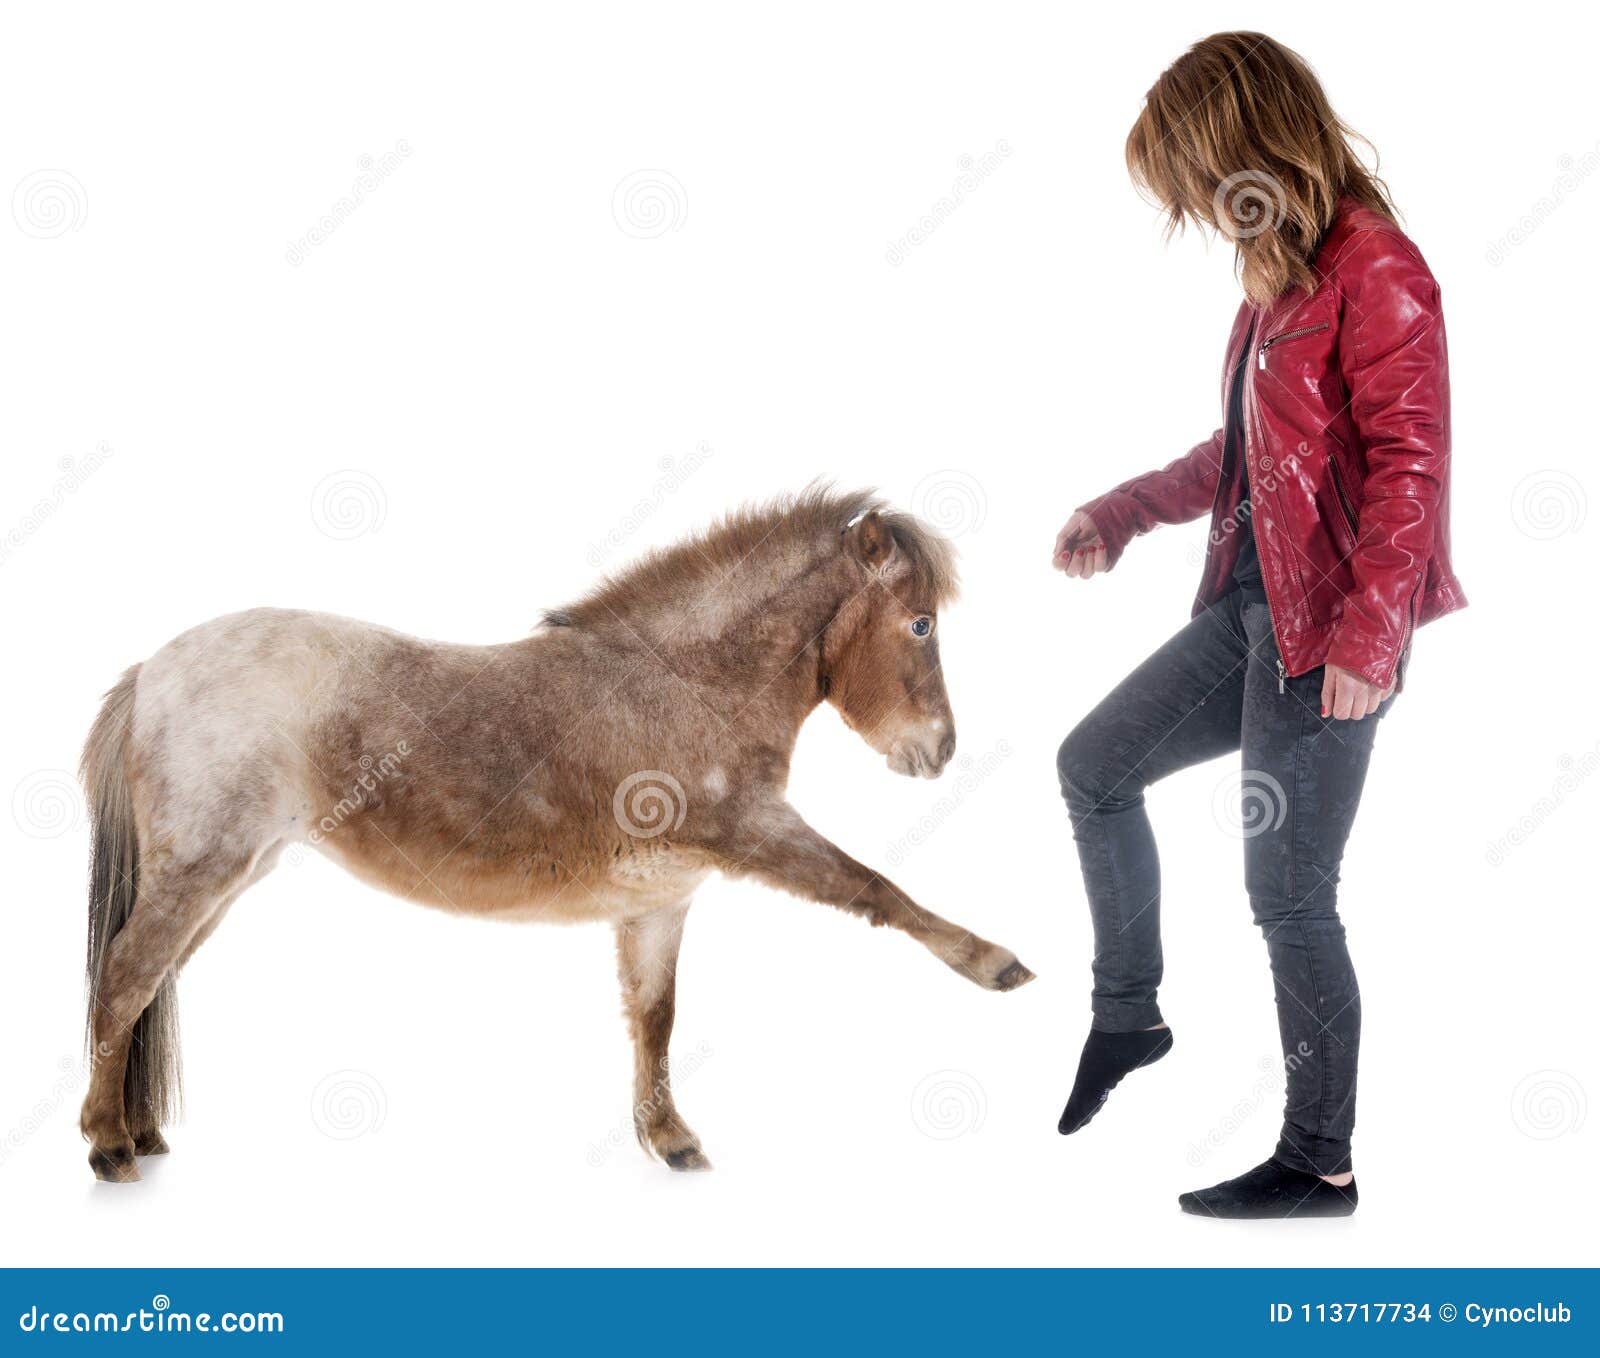 Falabella Miniature Horse And Girl Stock Photo Image Of Miniature Stroking 113717734